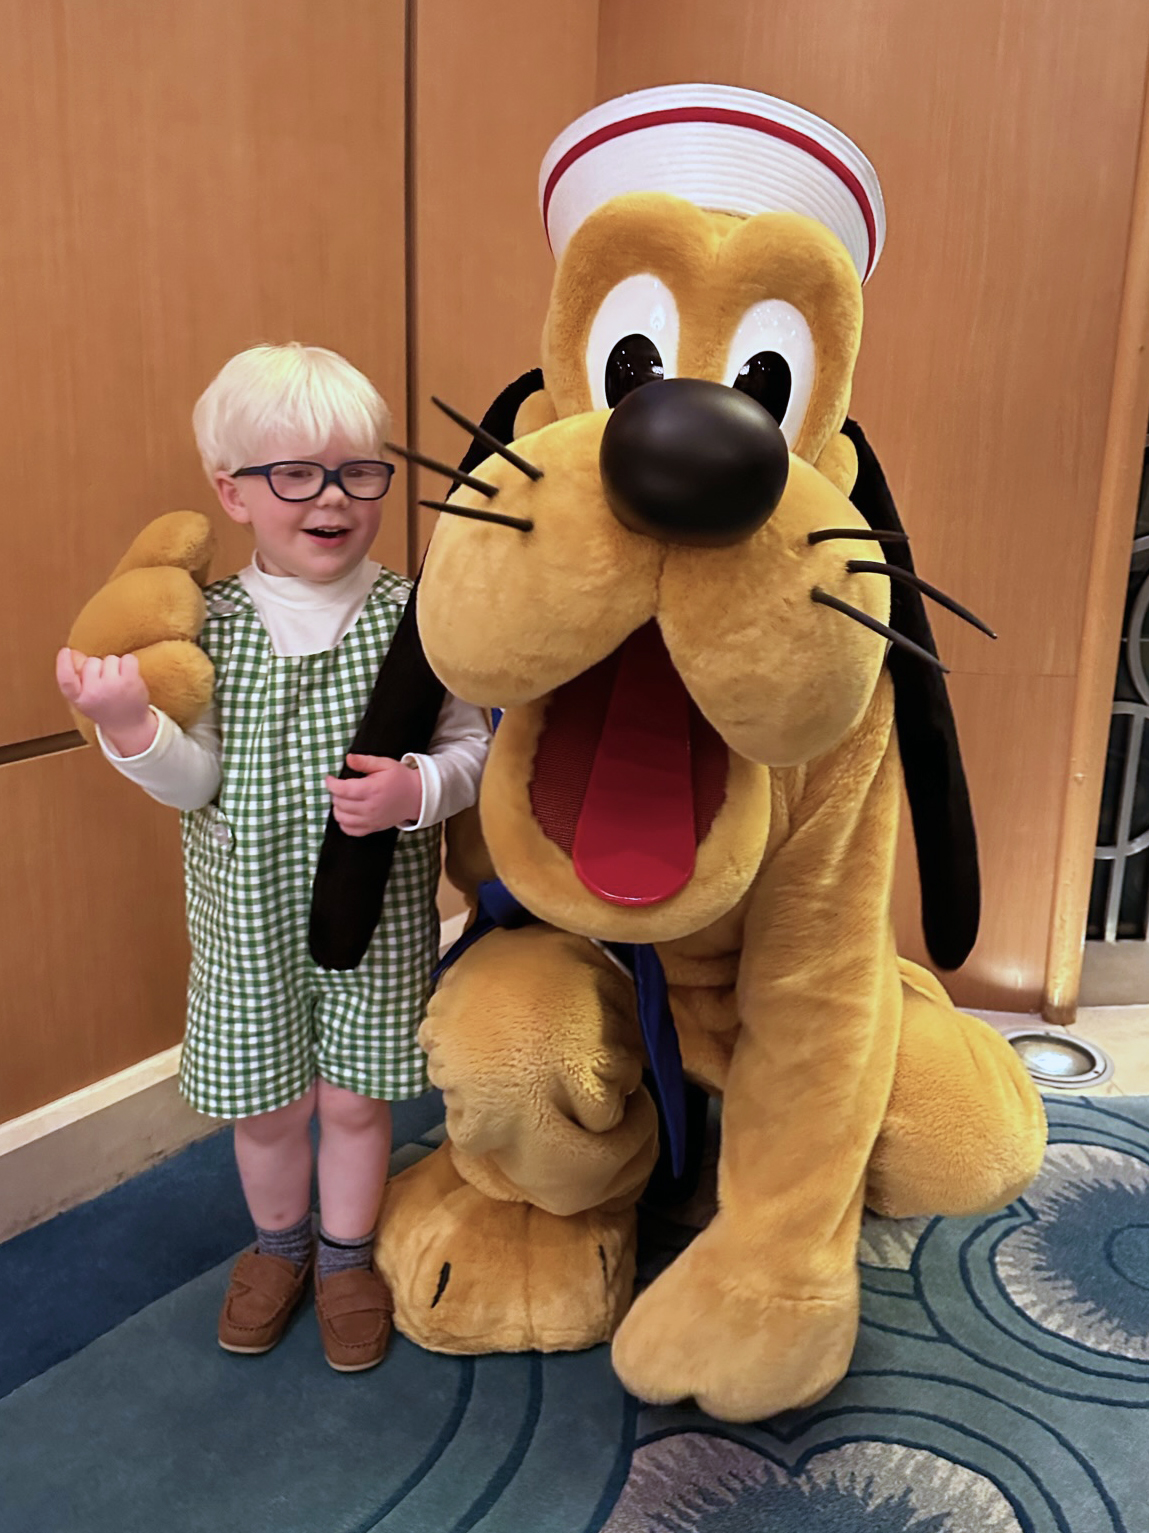 AJ standing with Pluto dressed in a sailor outfit